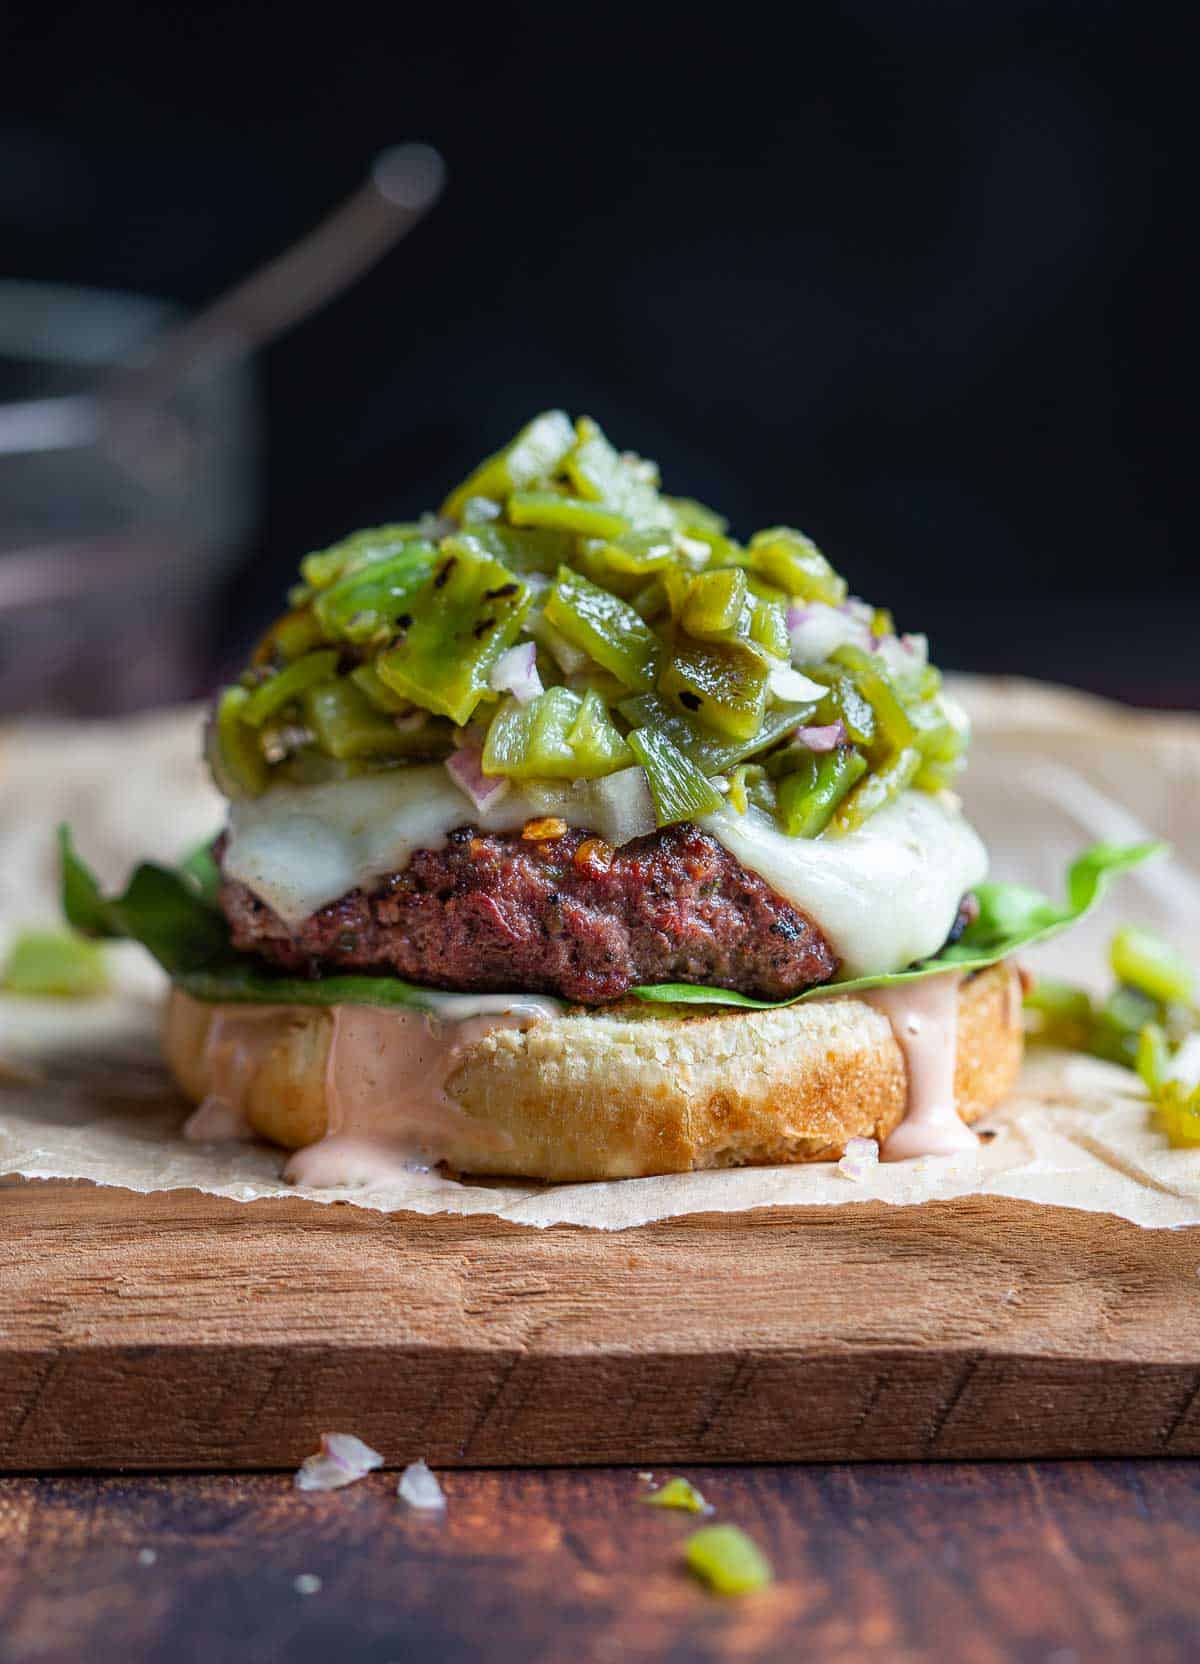 A cheeseburger topped with green chile salsa without a bun top